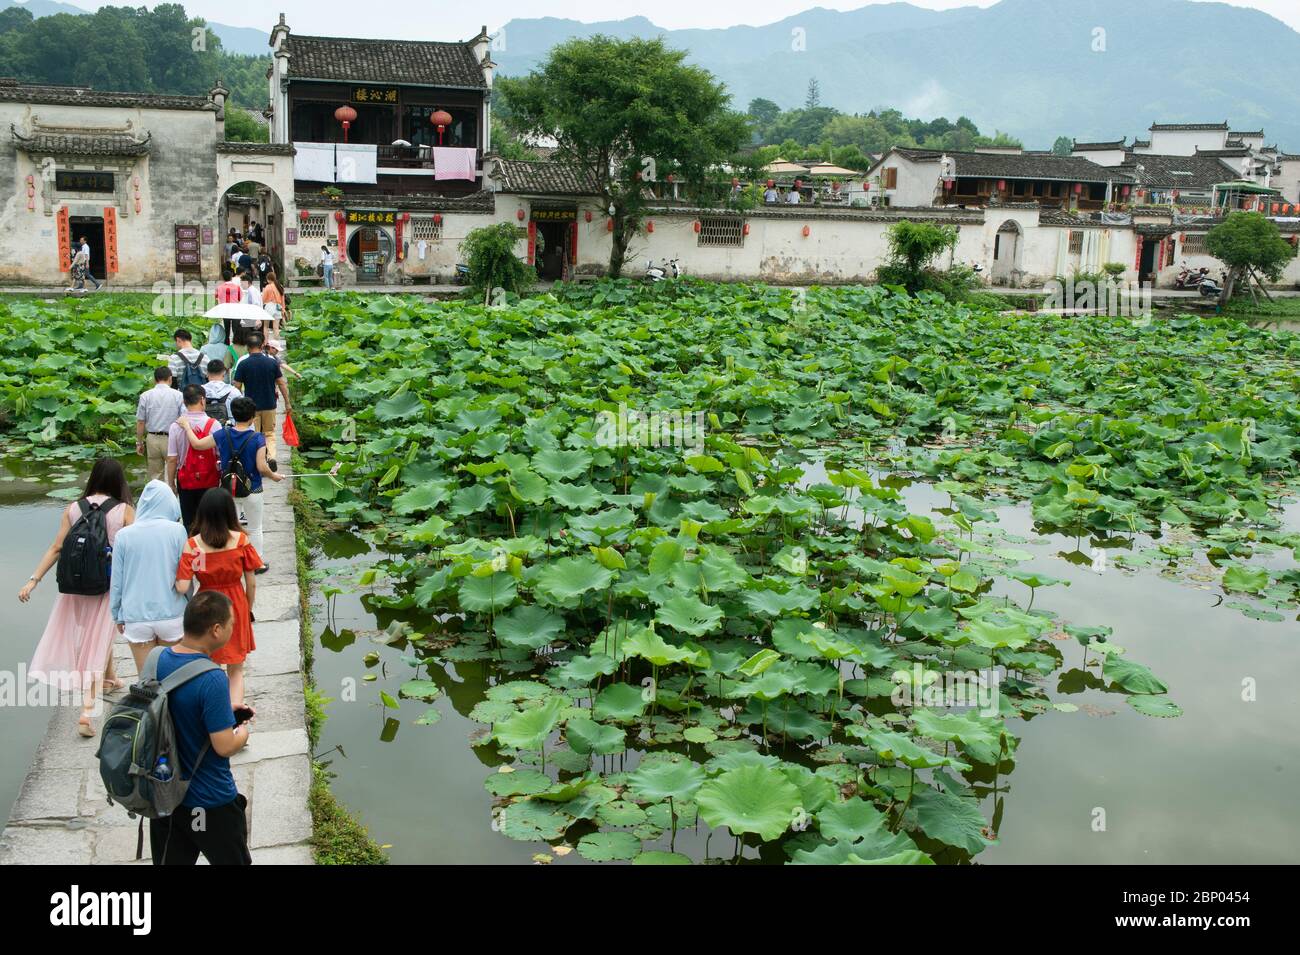 A stone footbridge crosses over Moon Pond, leading tourists into Hongcun village in Huangshan City. Stock Photo